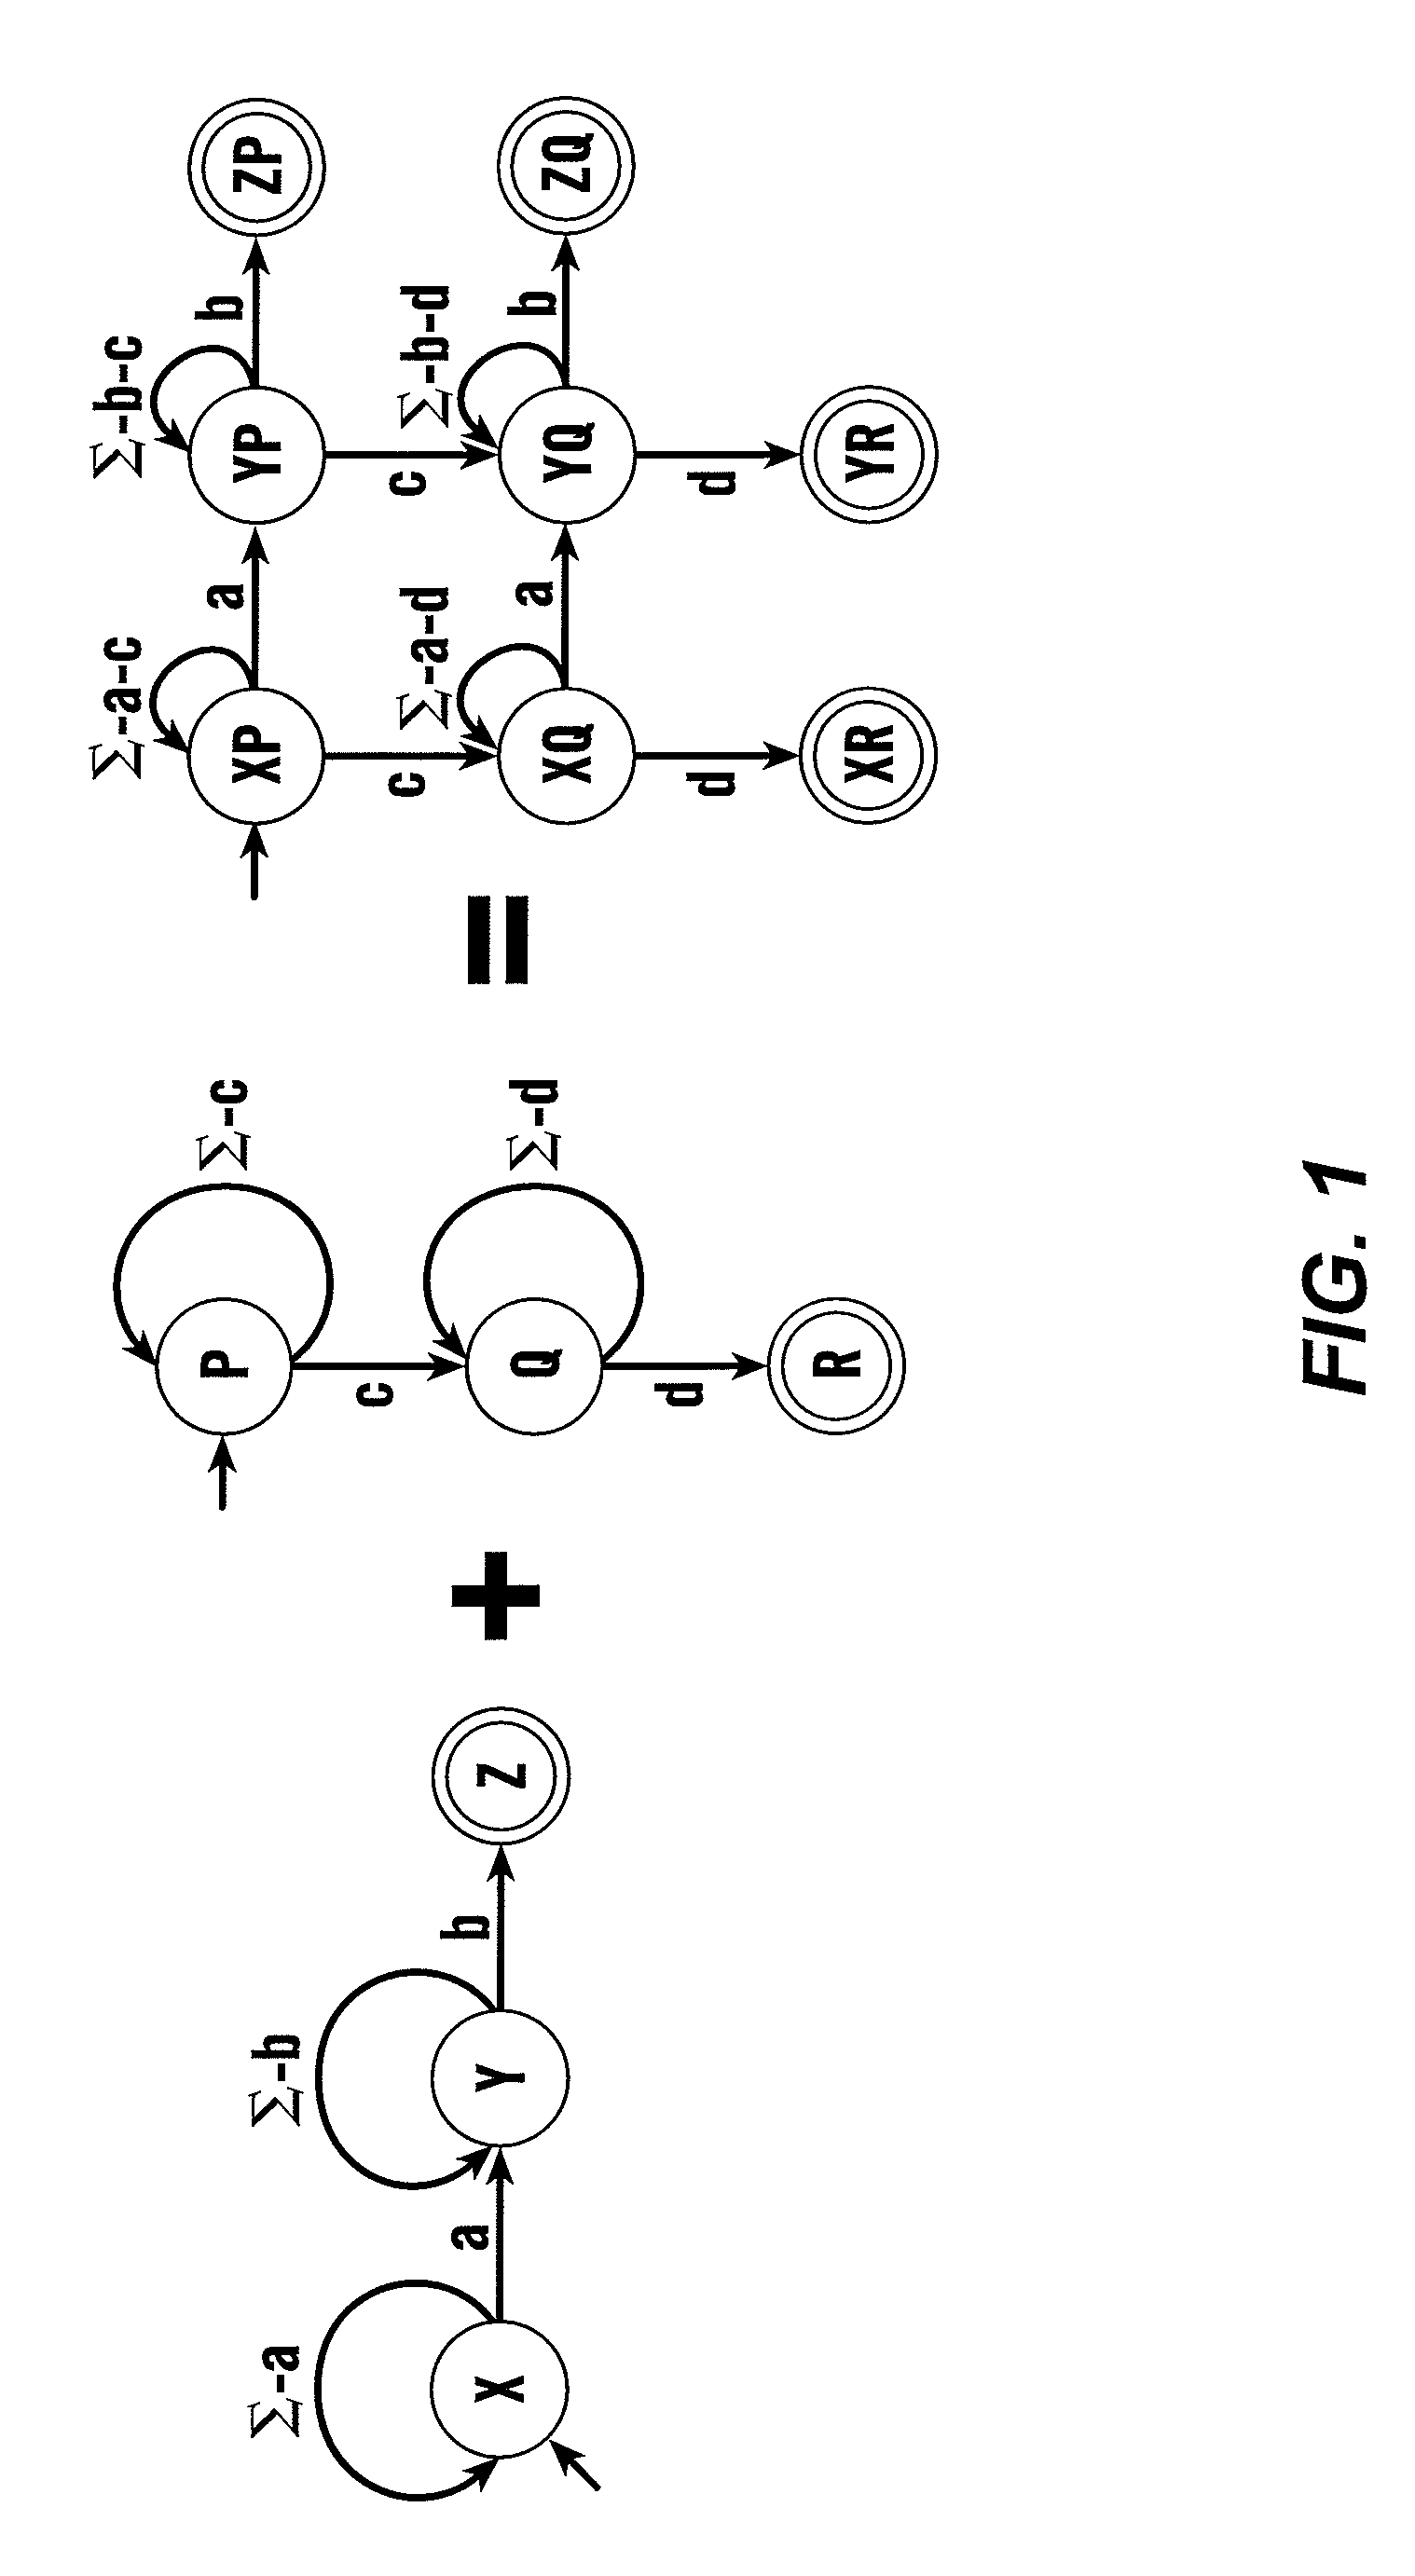 Extended finite state automata and systems and methods for recognizing patterns in a data stream using extended finite state automata